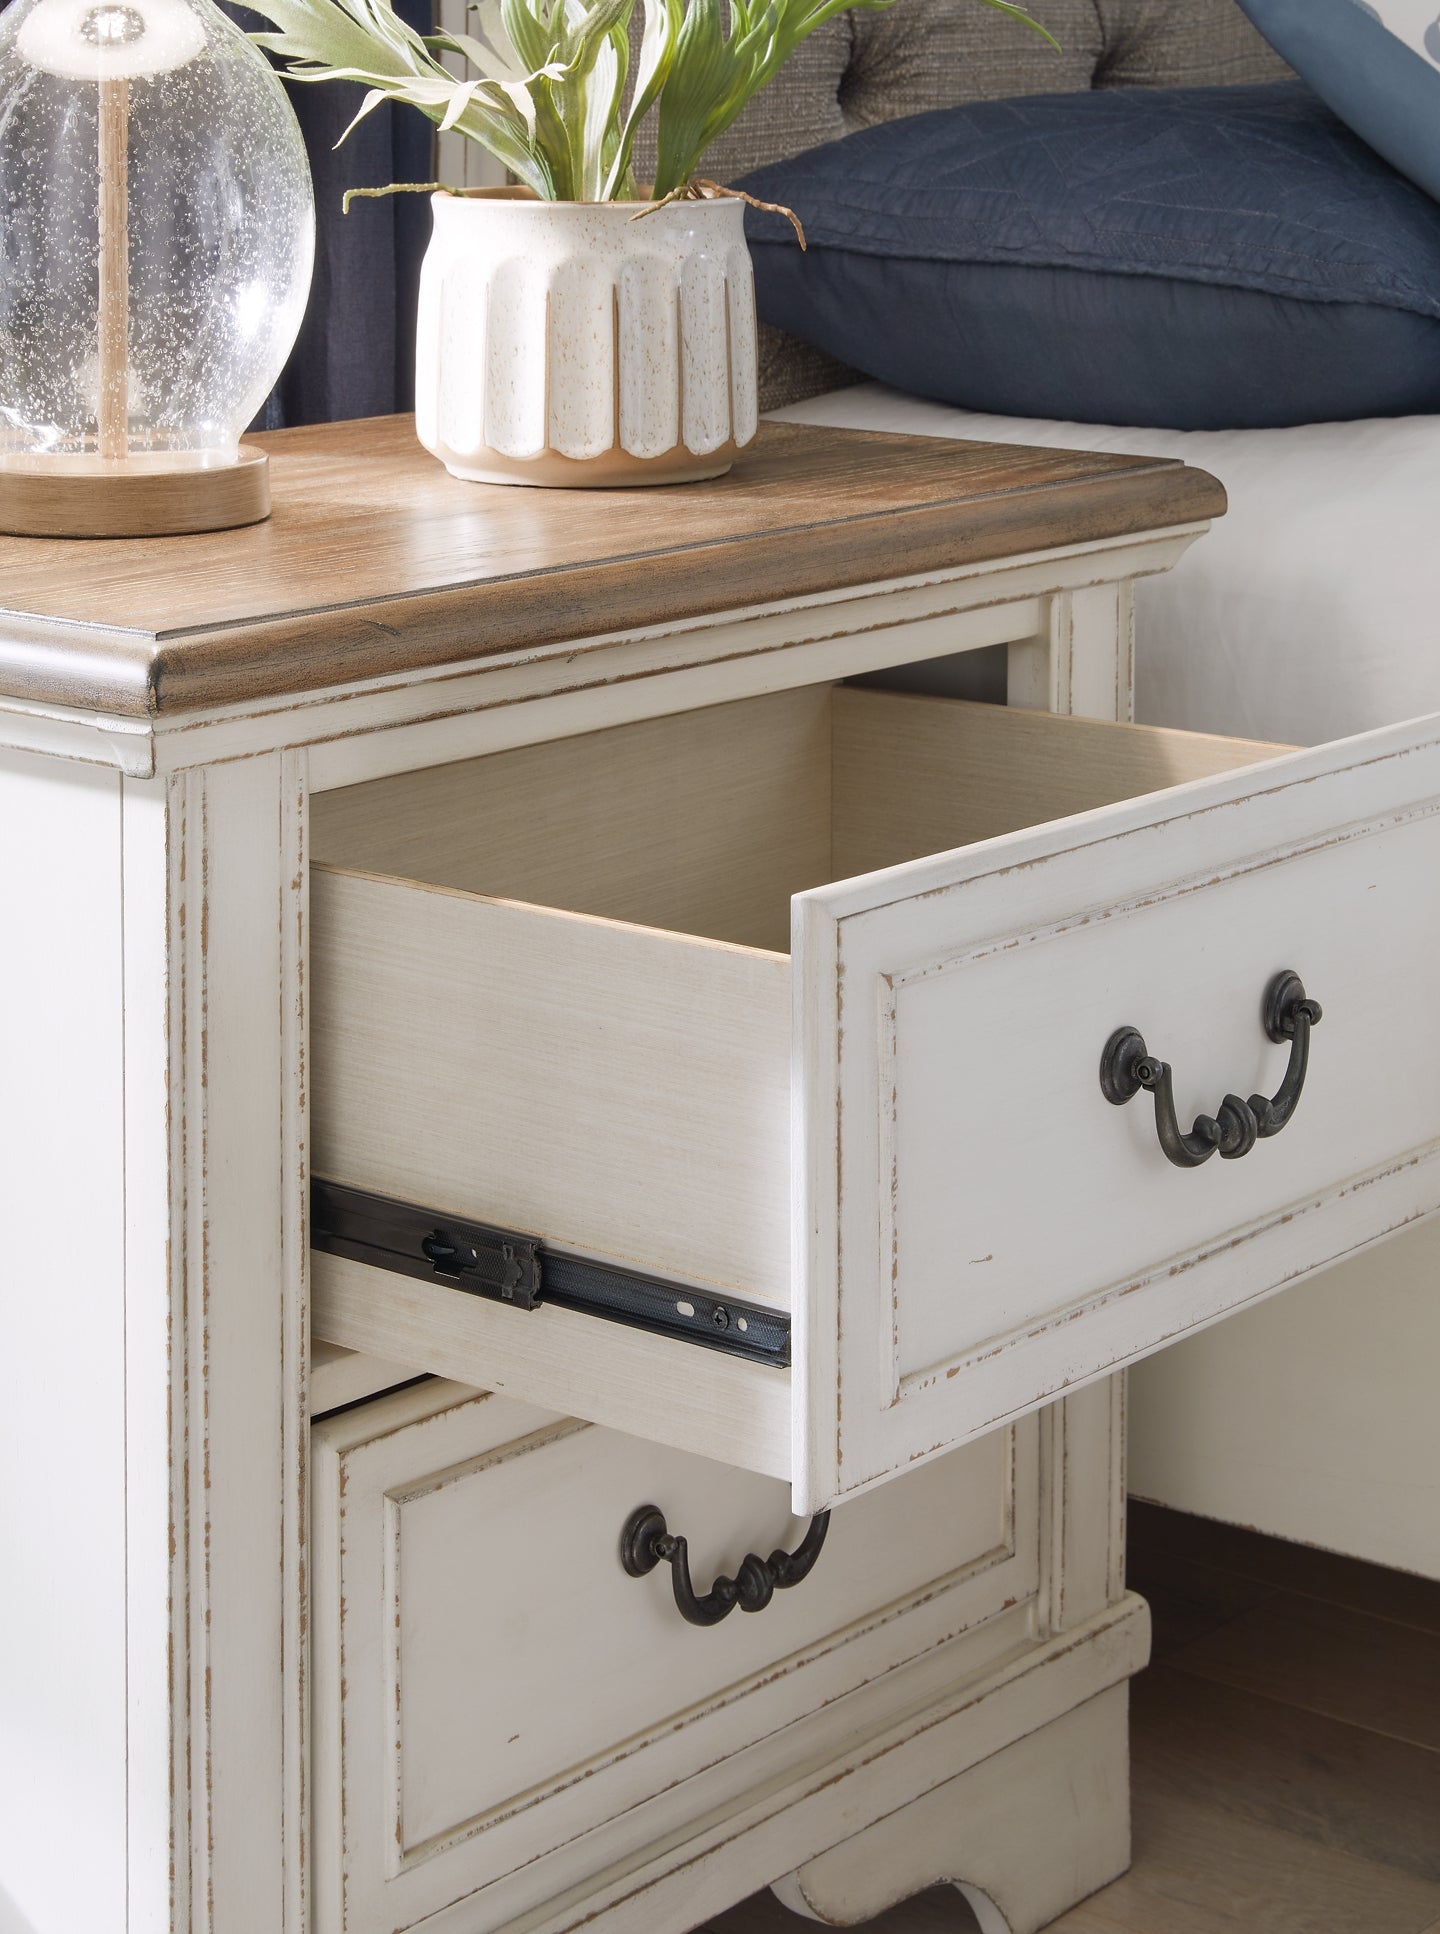 Brollyn Two Drawer Night Stand Signature Design by Ashley®